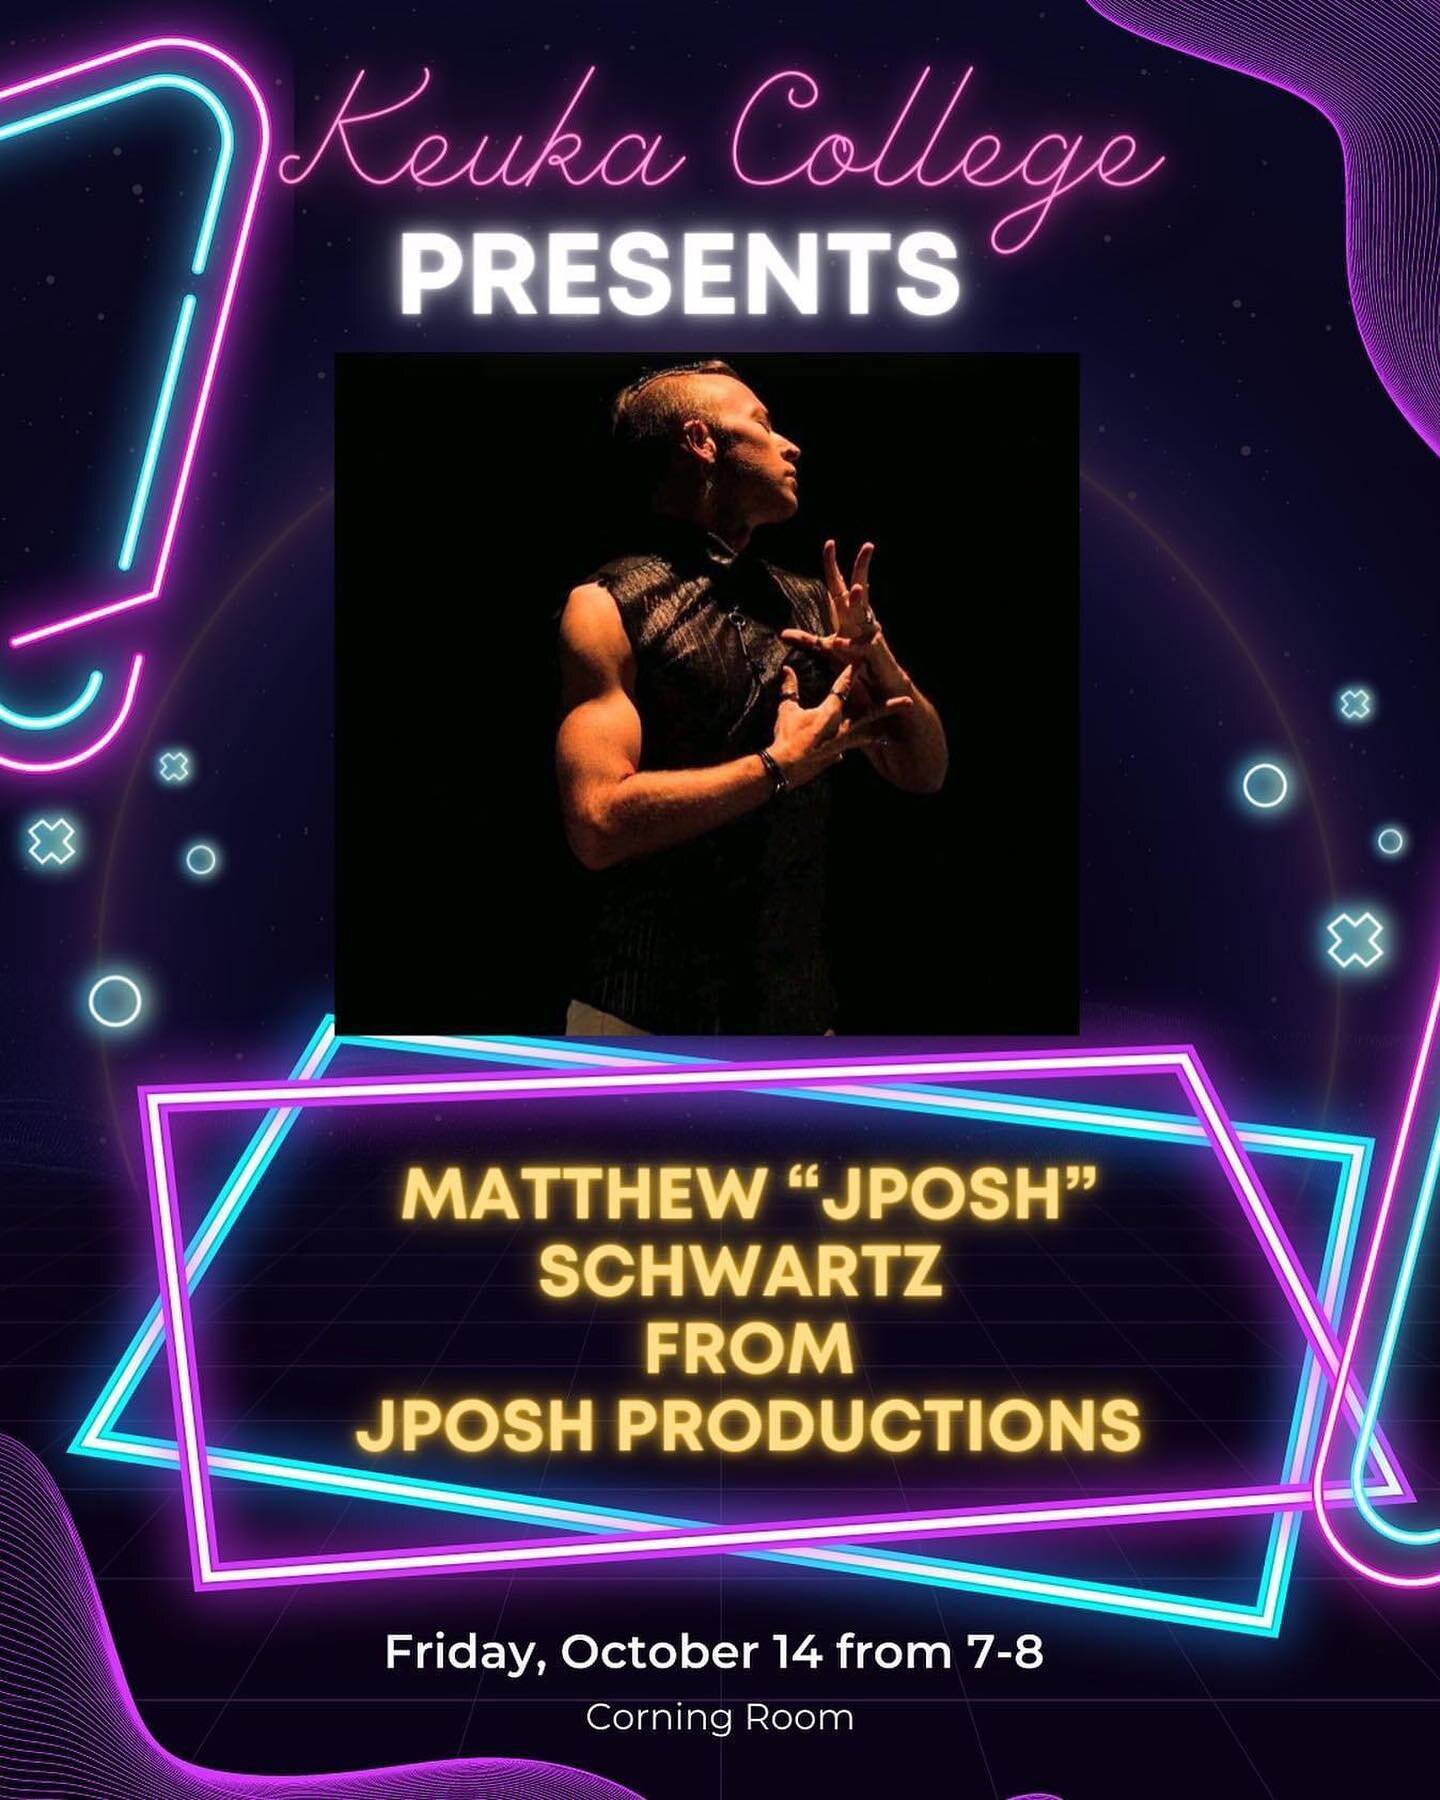 TONIGHT!!! If you&rsquo;re free, come to the first ever, JPosh Productions: &ldquo;One man show&rdquo; about the ups and downs of an adult journey through life. It&rsquo;s gonna be a mixed bag of signed musical performances and the lessons learned al